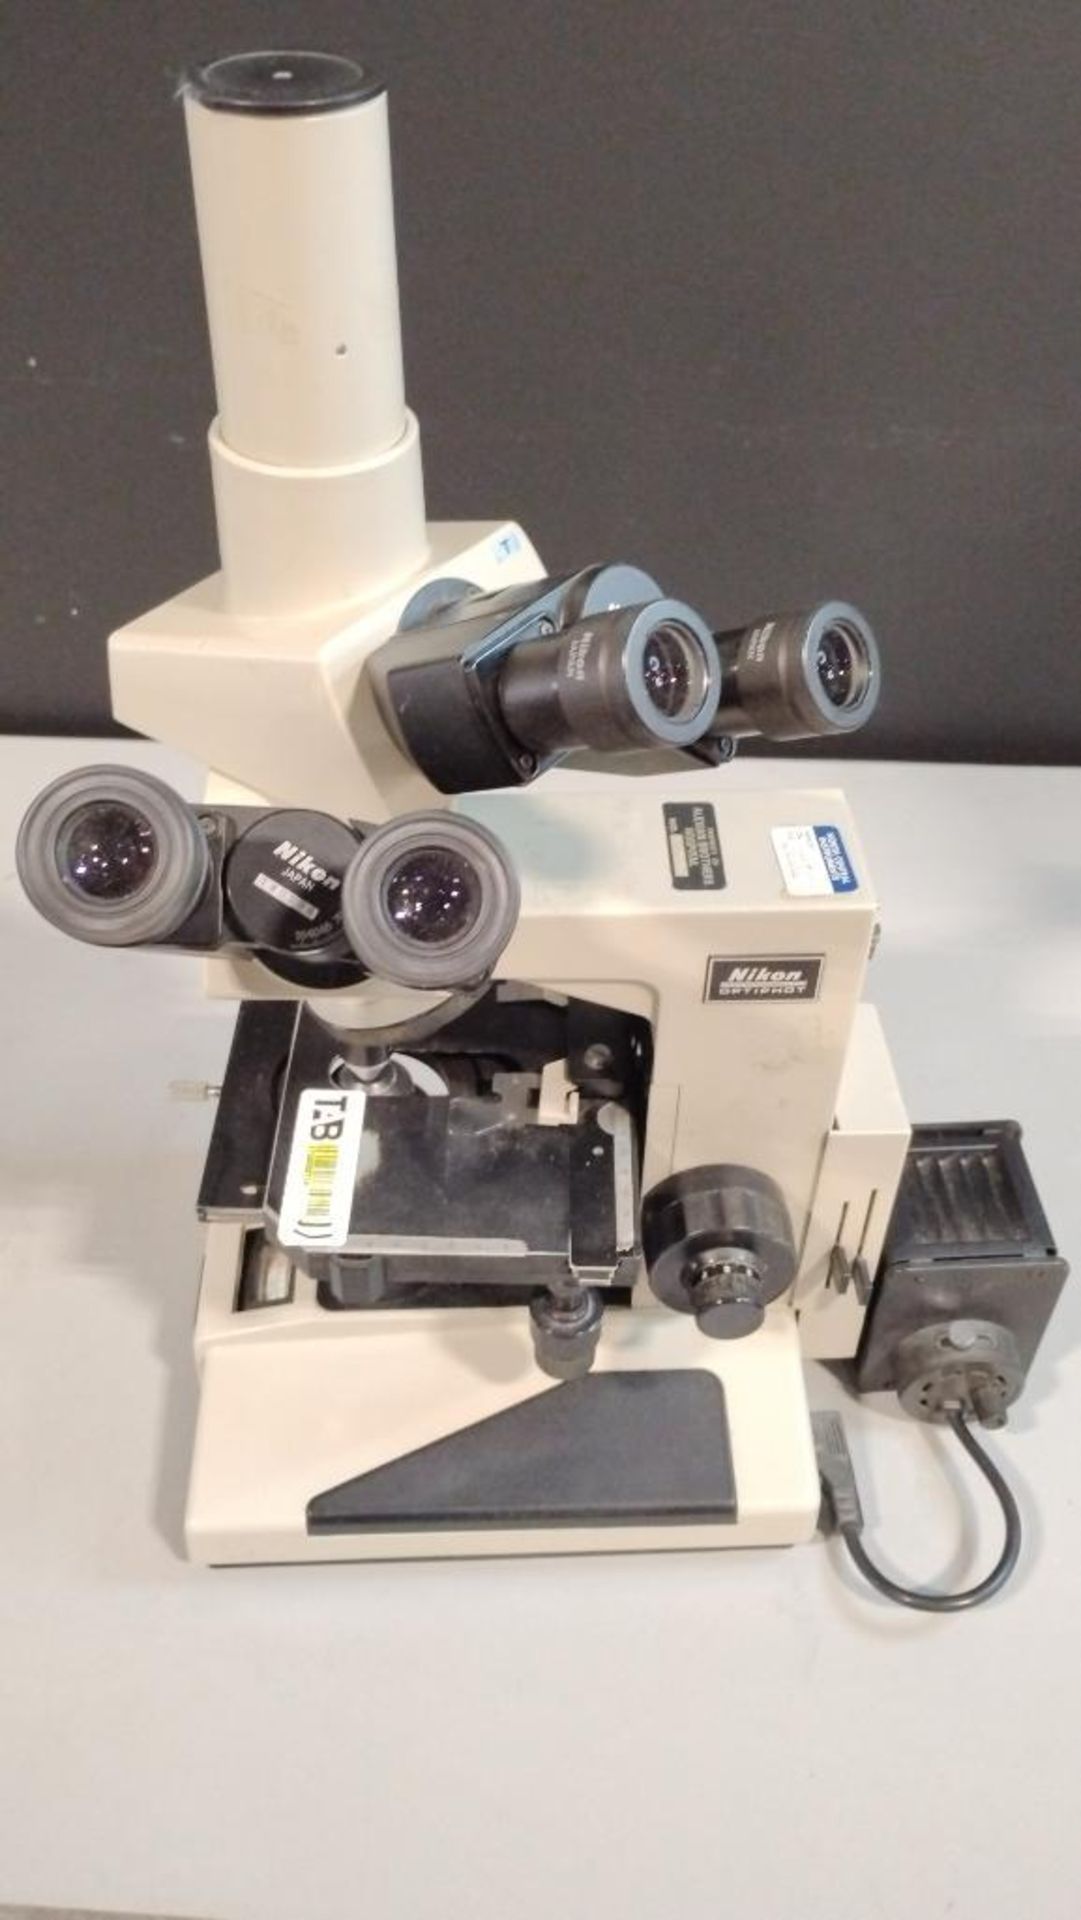 NIKON OPTIPHOT LAB MICROSCOPE WITH 2 OBJECTIVES - Image 2 of 4